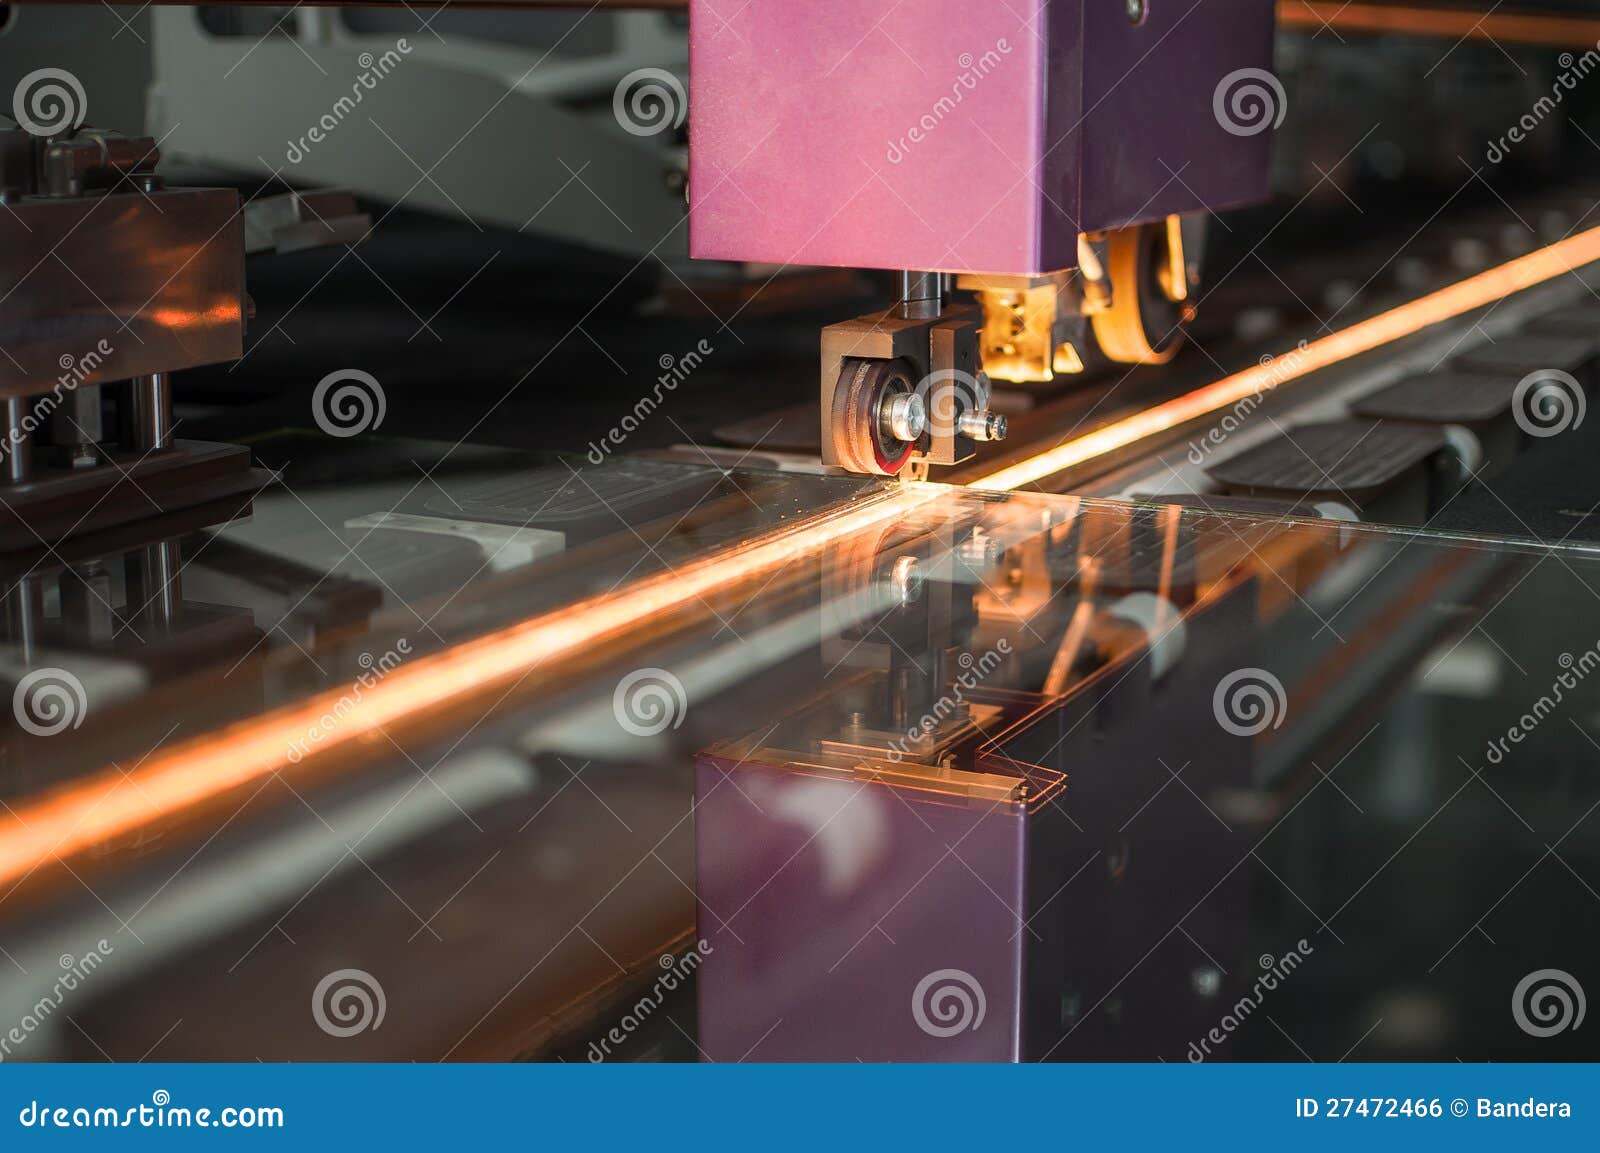 540+ Glass Cutting Machine Stock Photos, Pictures & Royalty-Free